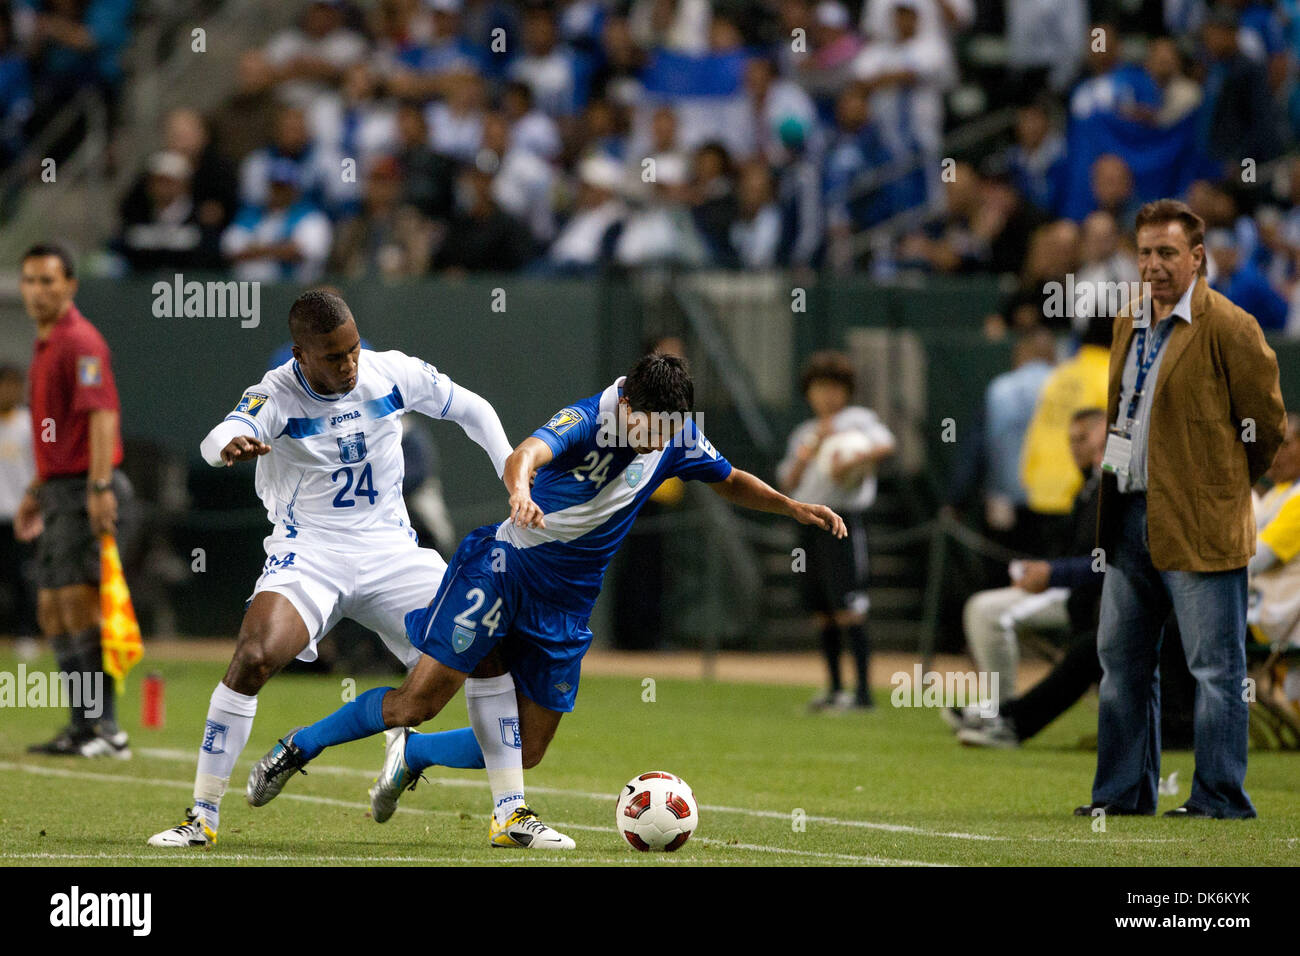 June 6, 2011 - Carson, California, U.S - Honduras Brayan Beckeles defender #24 (L) and Guatemala midfielder Jonathan Lopez #24 (R) in action during the 2011 CONCACAF Gold Cup group B game between Honduras and Guatemala at the Home Depot Center. (Credit Image: © Brandon Parry/Southcreek Global/ZUMAPRESS.com) Stock Photo